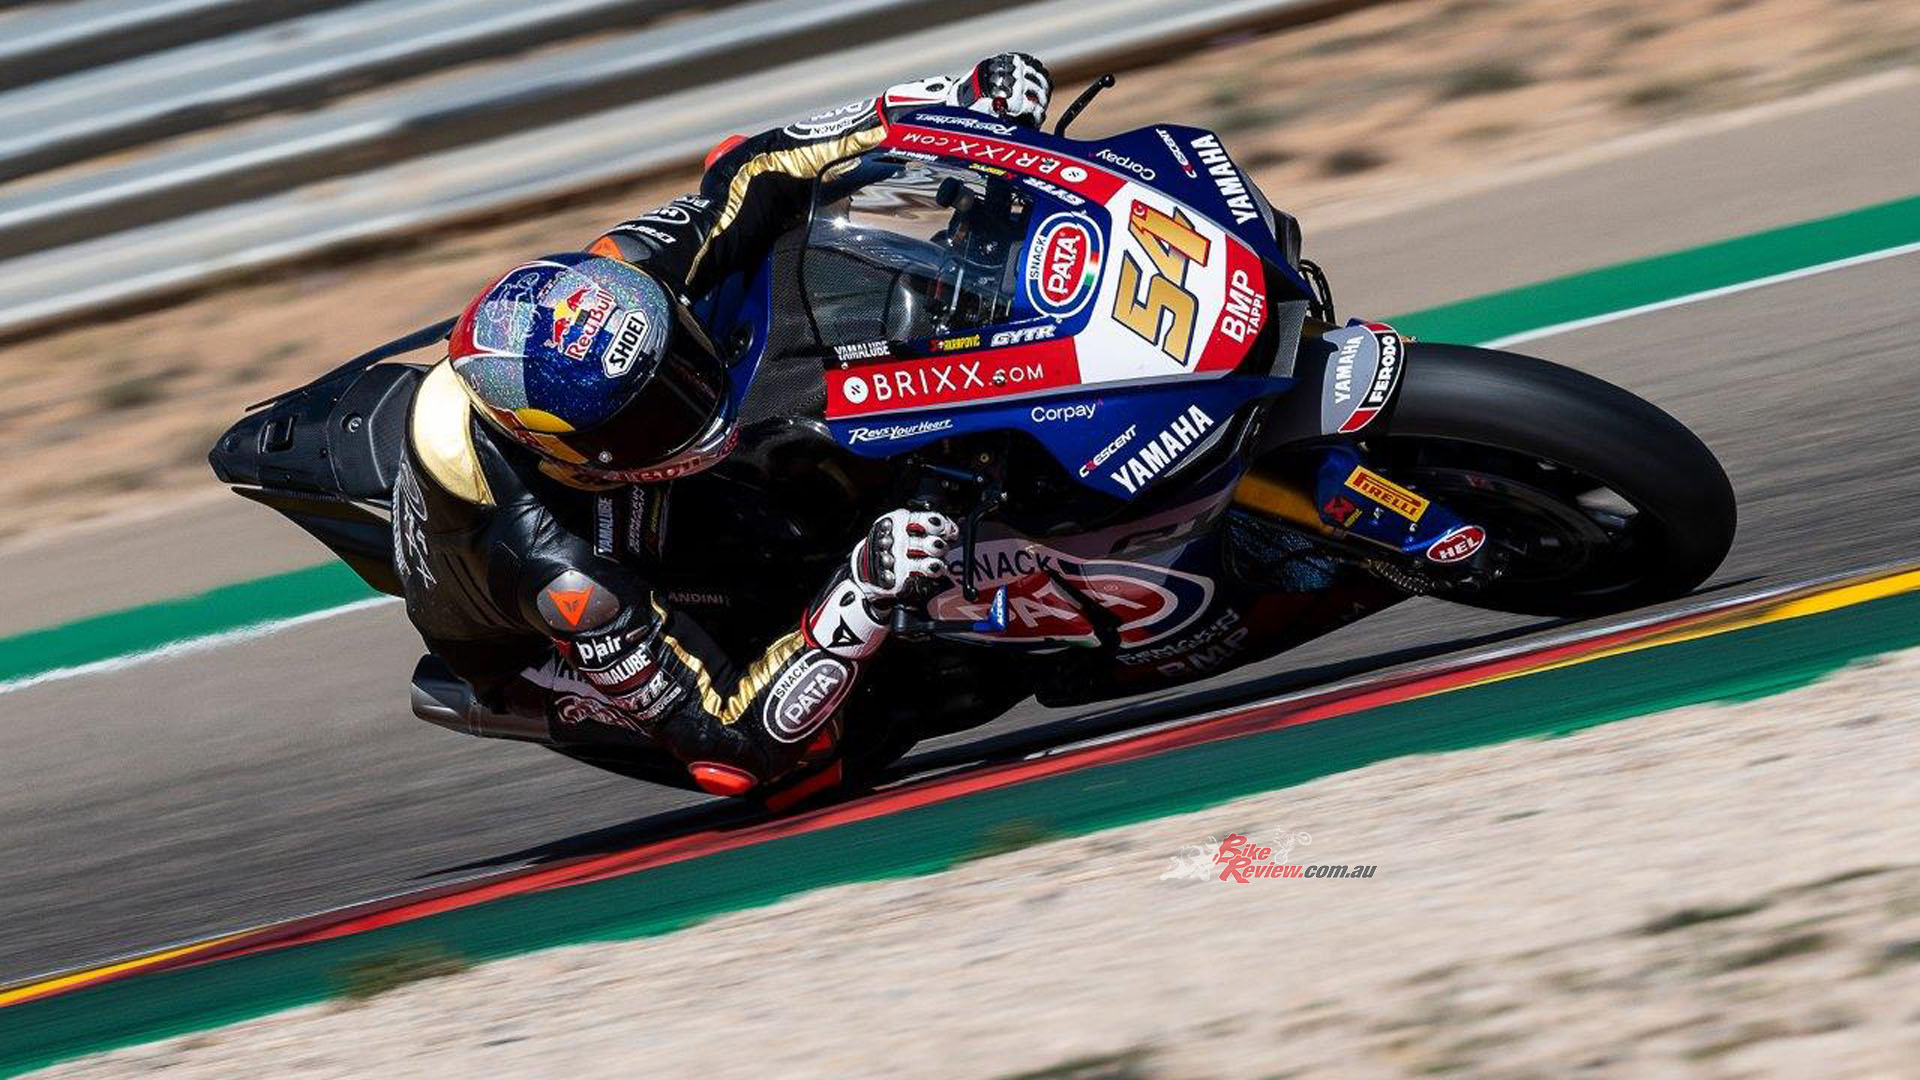 Five riders from three teams have embarked on a two day pre-season test at Spain’s  MotorLand Aragon circuit, with reigning champion Toprak Razgatlioglu topping the timesheets.